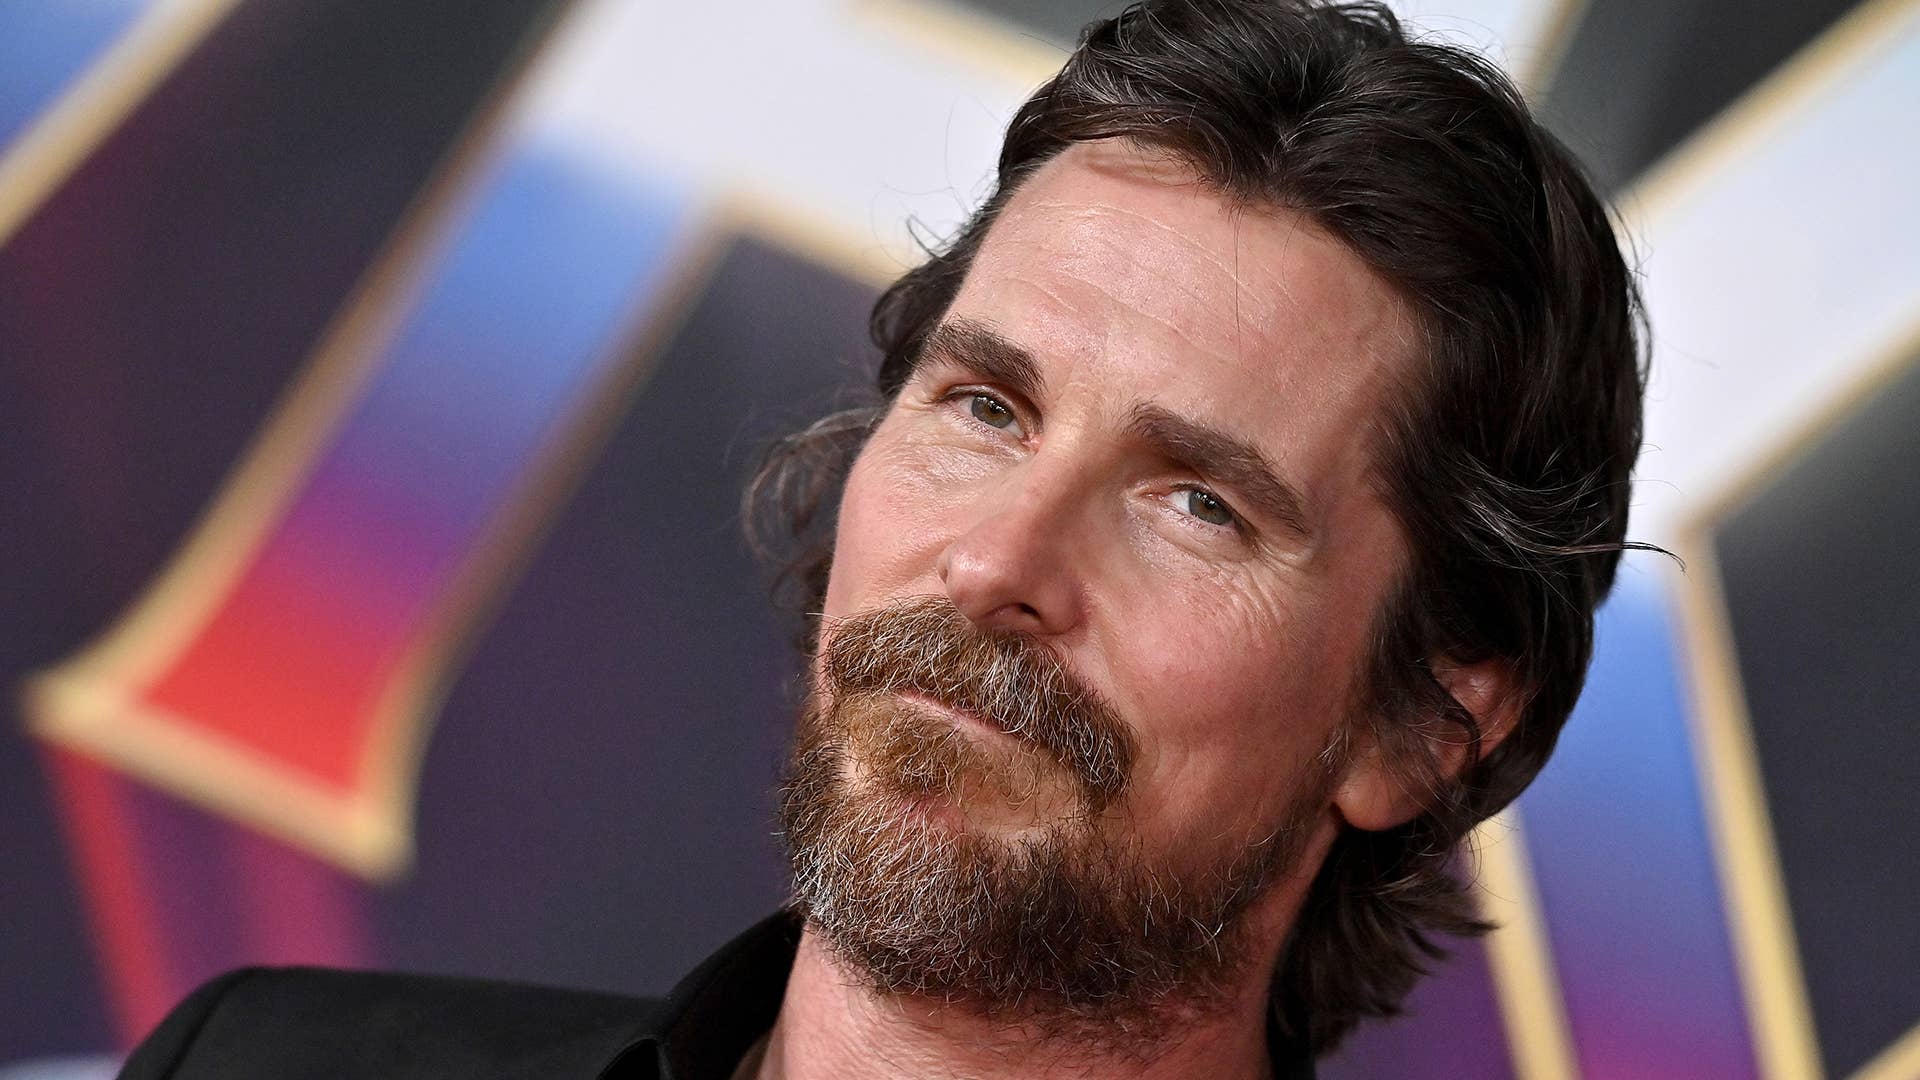 Christian Bale attends Marvel Studios "Thor: Love and Thunder" Los Angeles Premiere